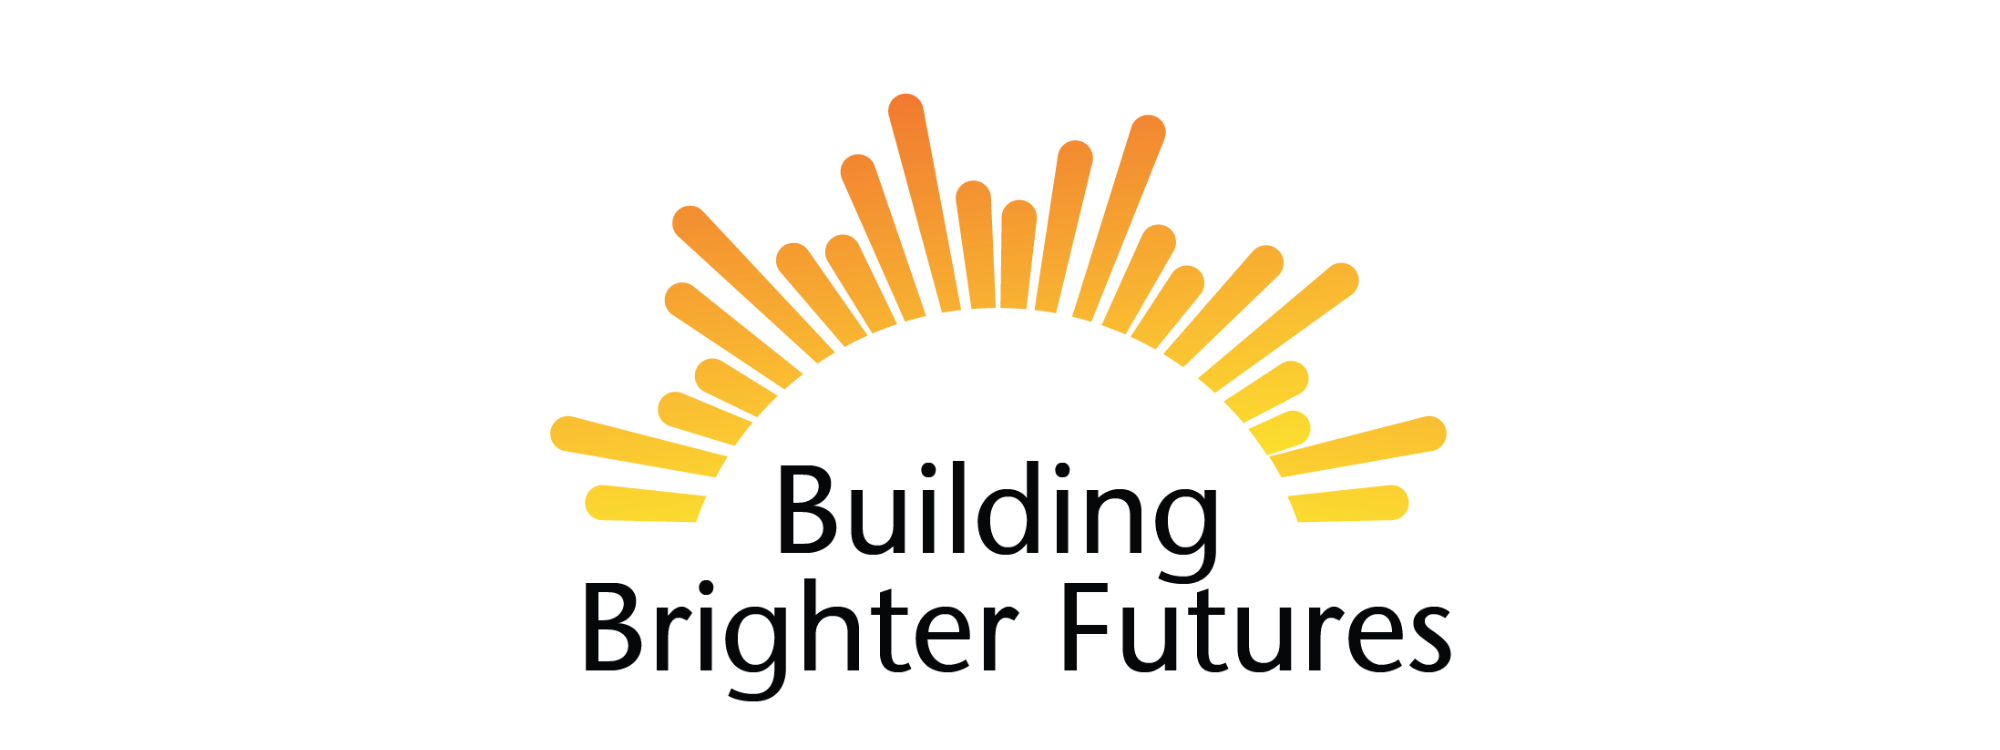 Virtual Building Brighter Futures Gala Program Now Available On Demand